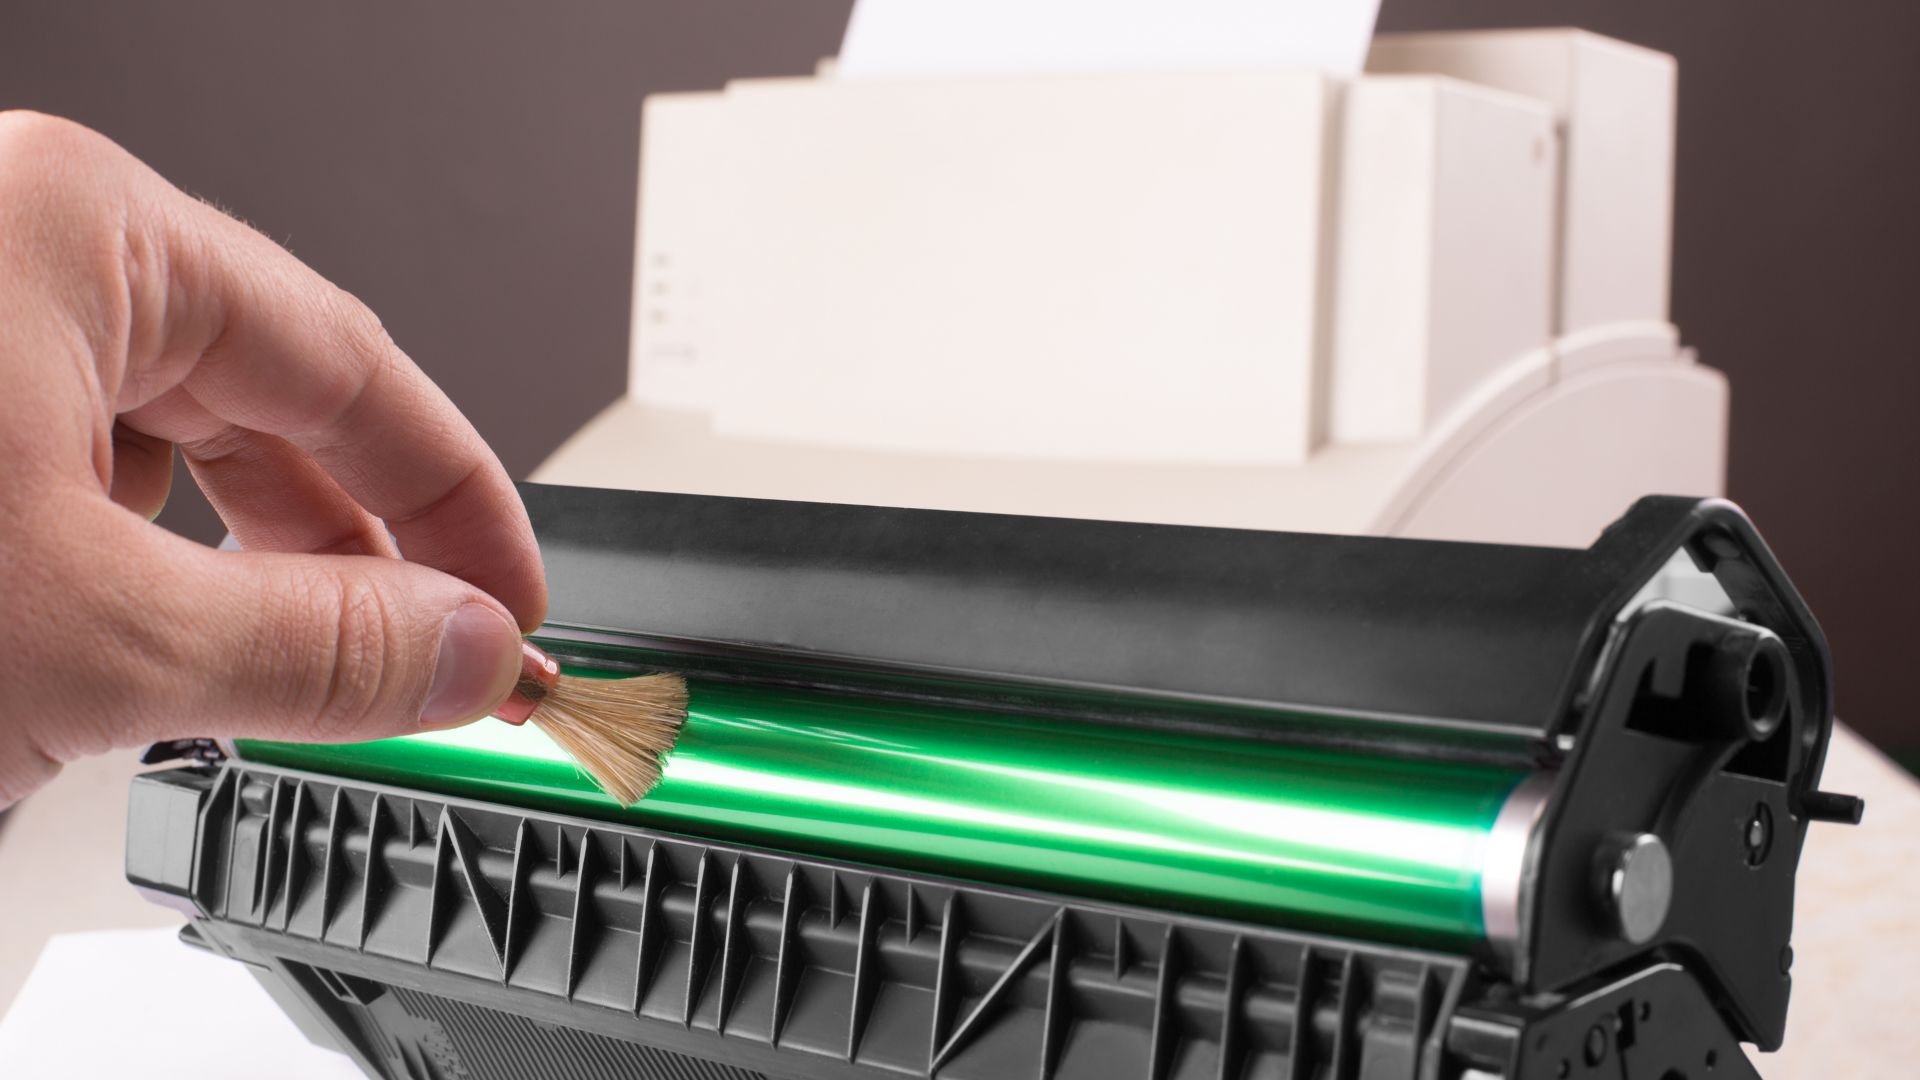 Cleaning A Laser Printer Drum